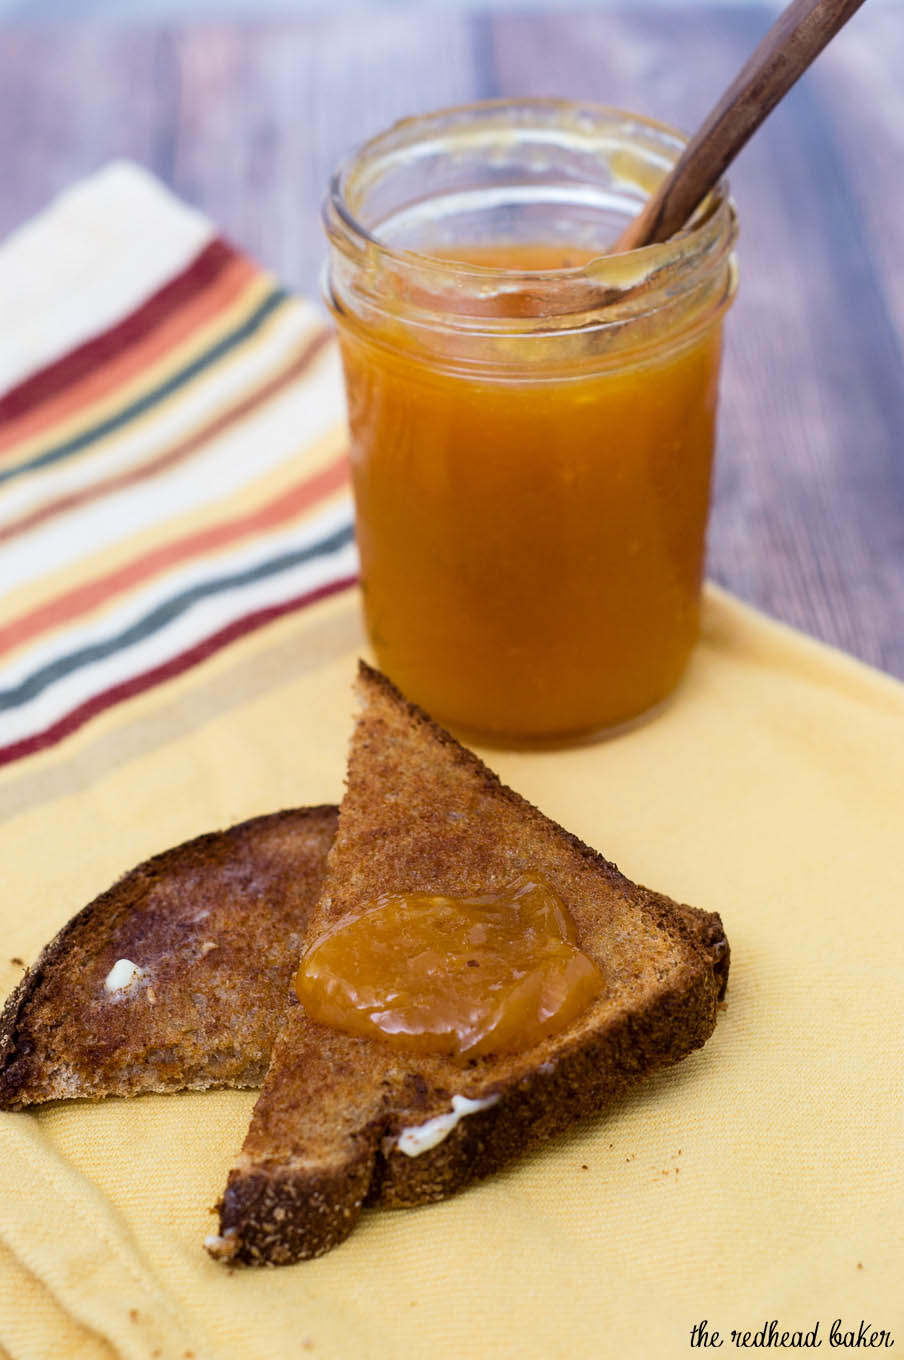 Peach butter is smoother and less sweet than peach preserves, resulting in a purer peach flavor. Canning peach butter preserves the flavor all year long. #SundaySupper